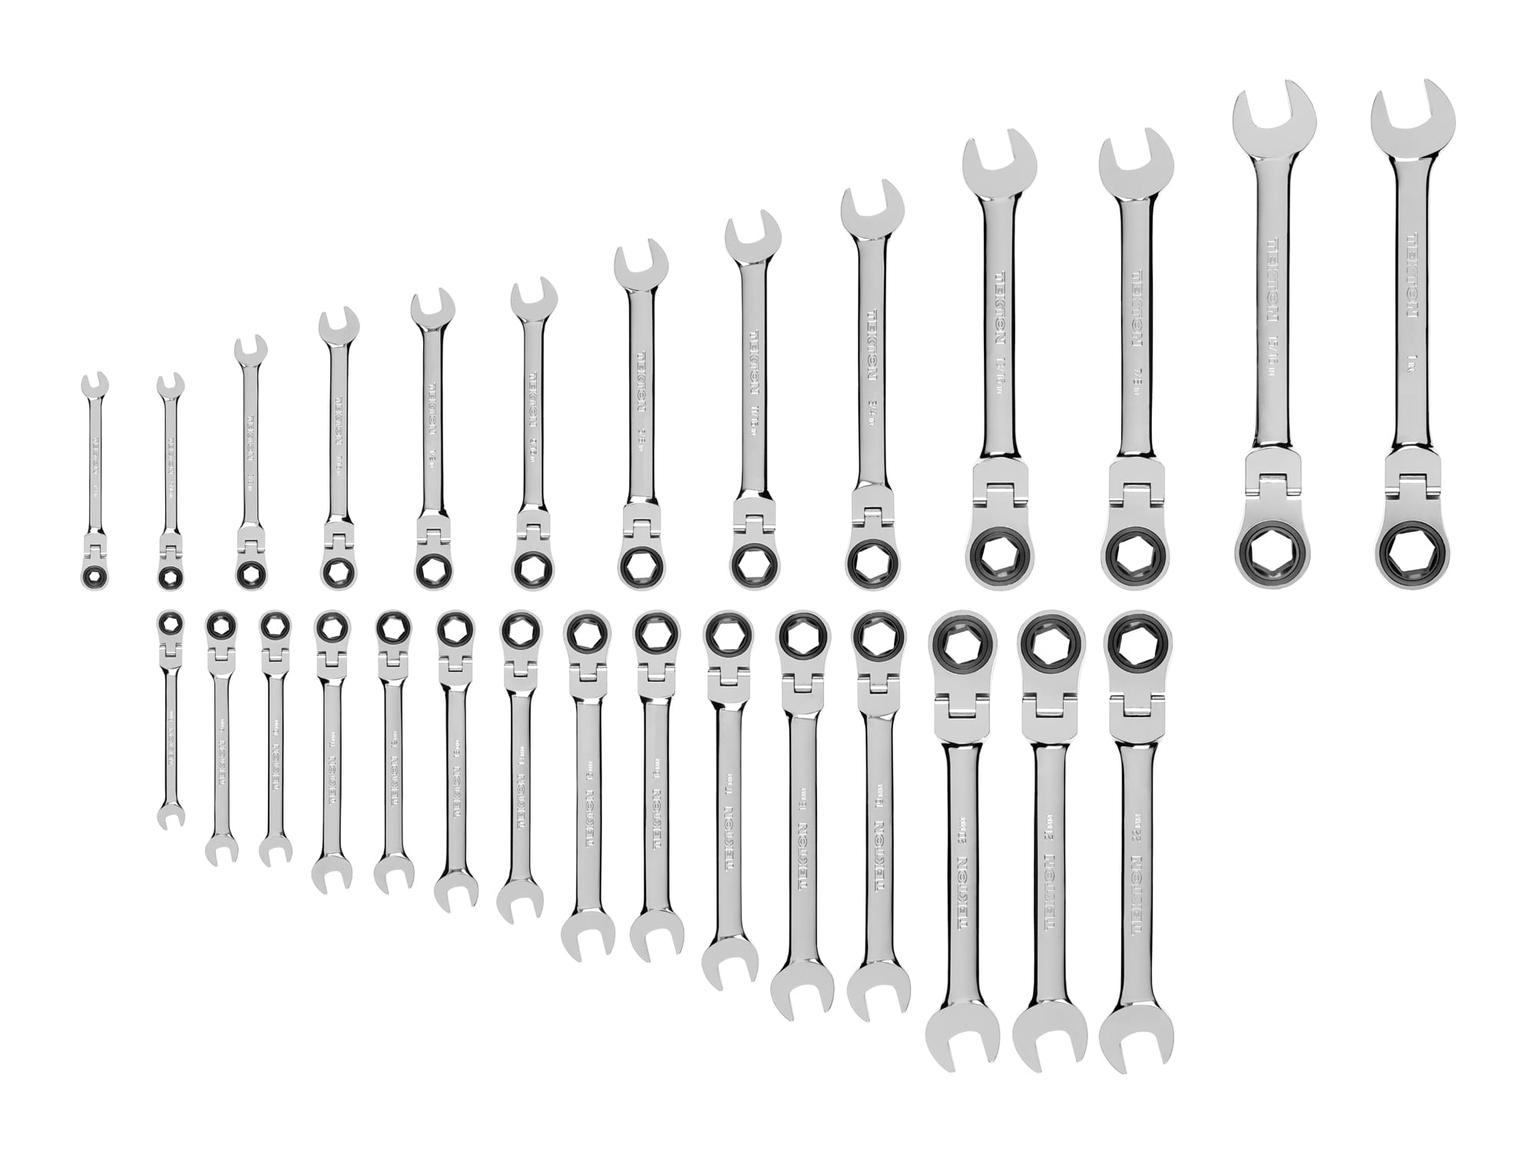 TEKTON WRN57302-T Flex Ratcheting Combination Wrench Set, 28-Piece (1/4-1 in., 8-22mm)